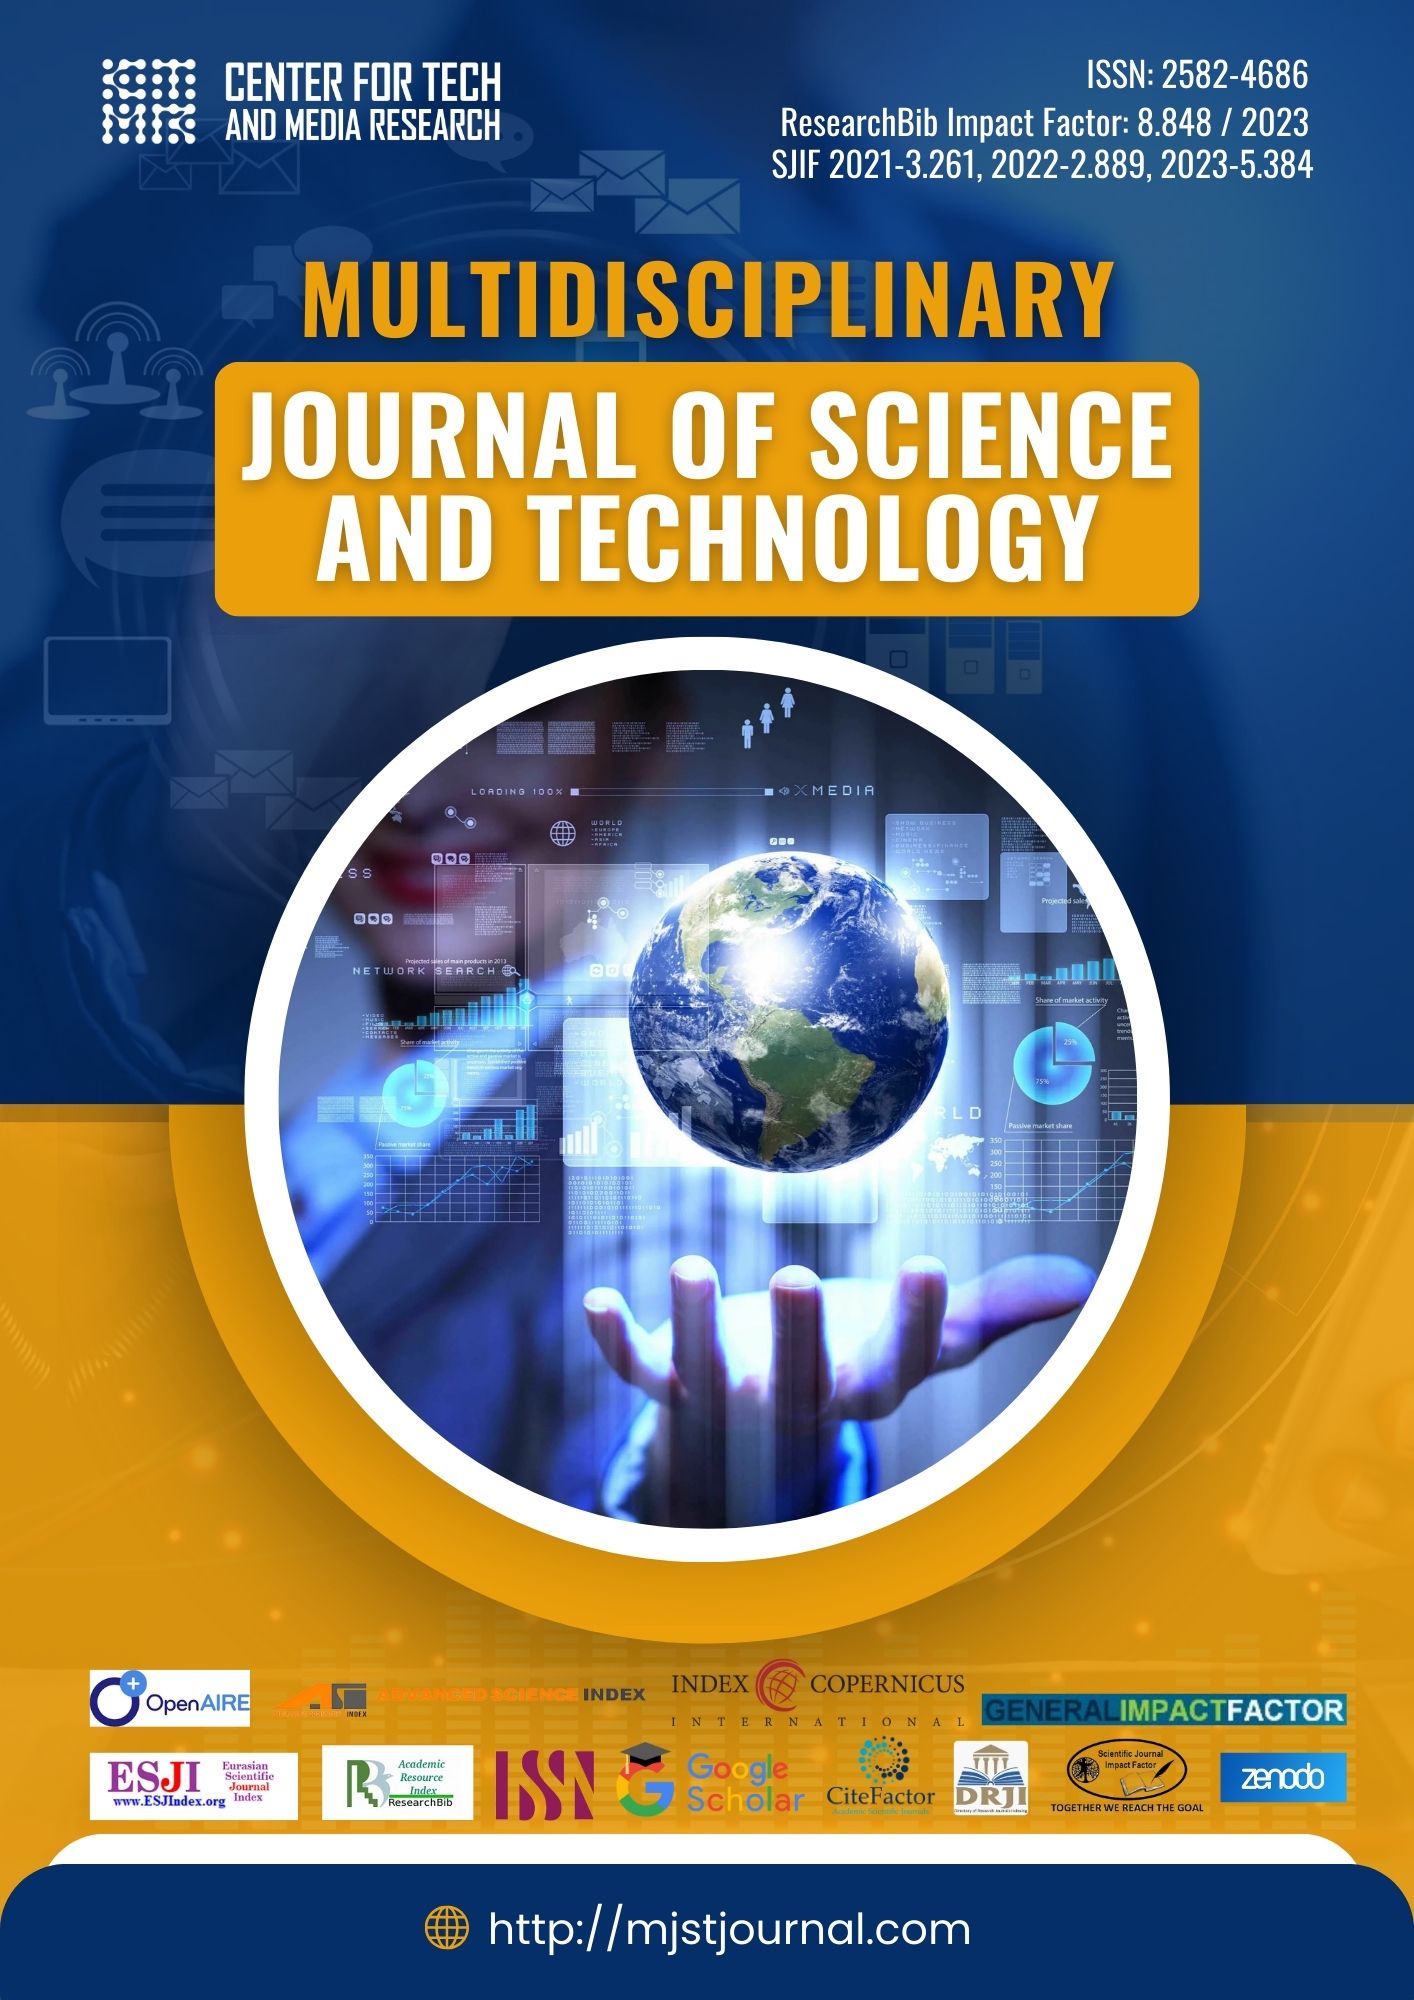                         View Vol. 3 No. 5 (2023): Multidisciplinary Journal of Science and Technology
                    